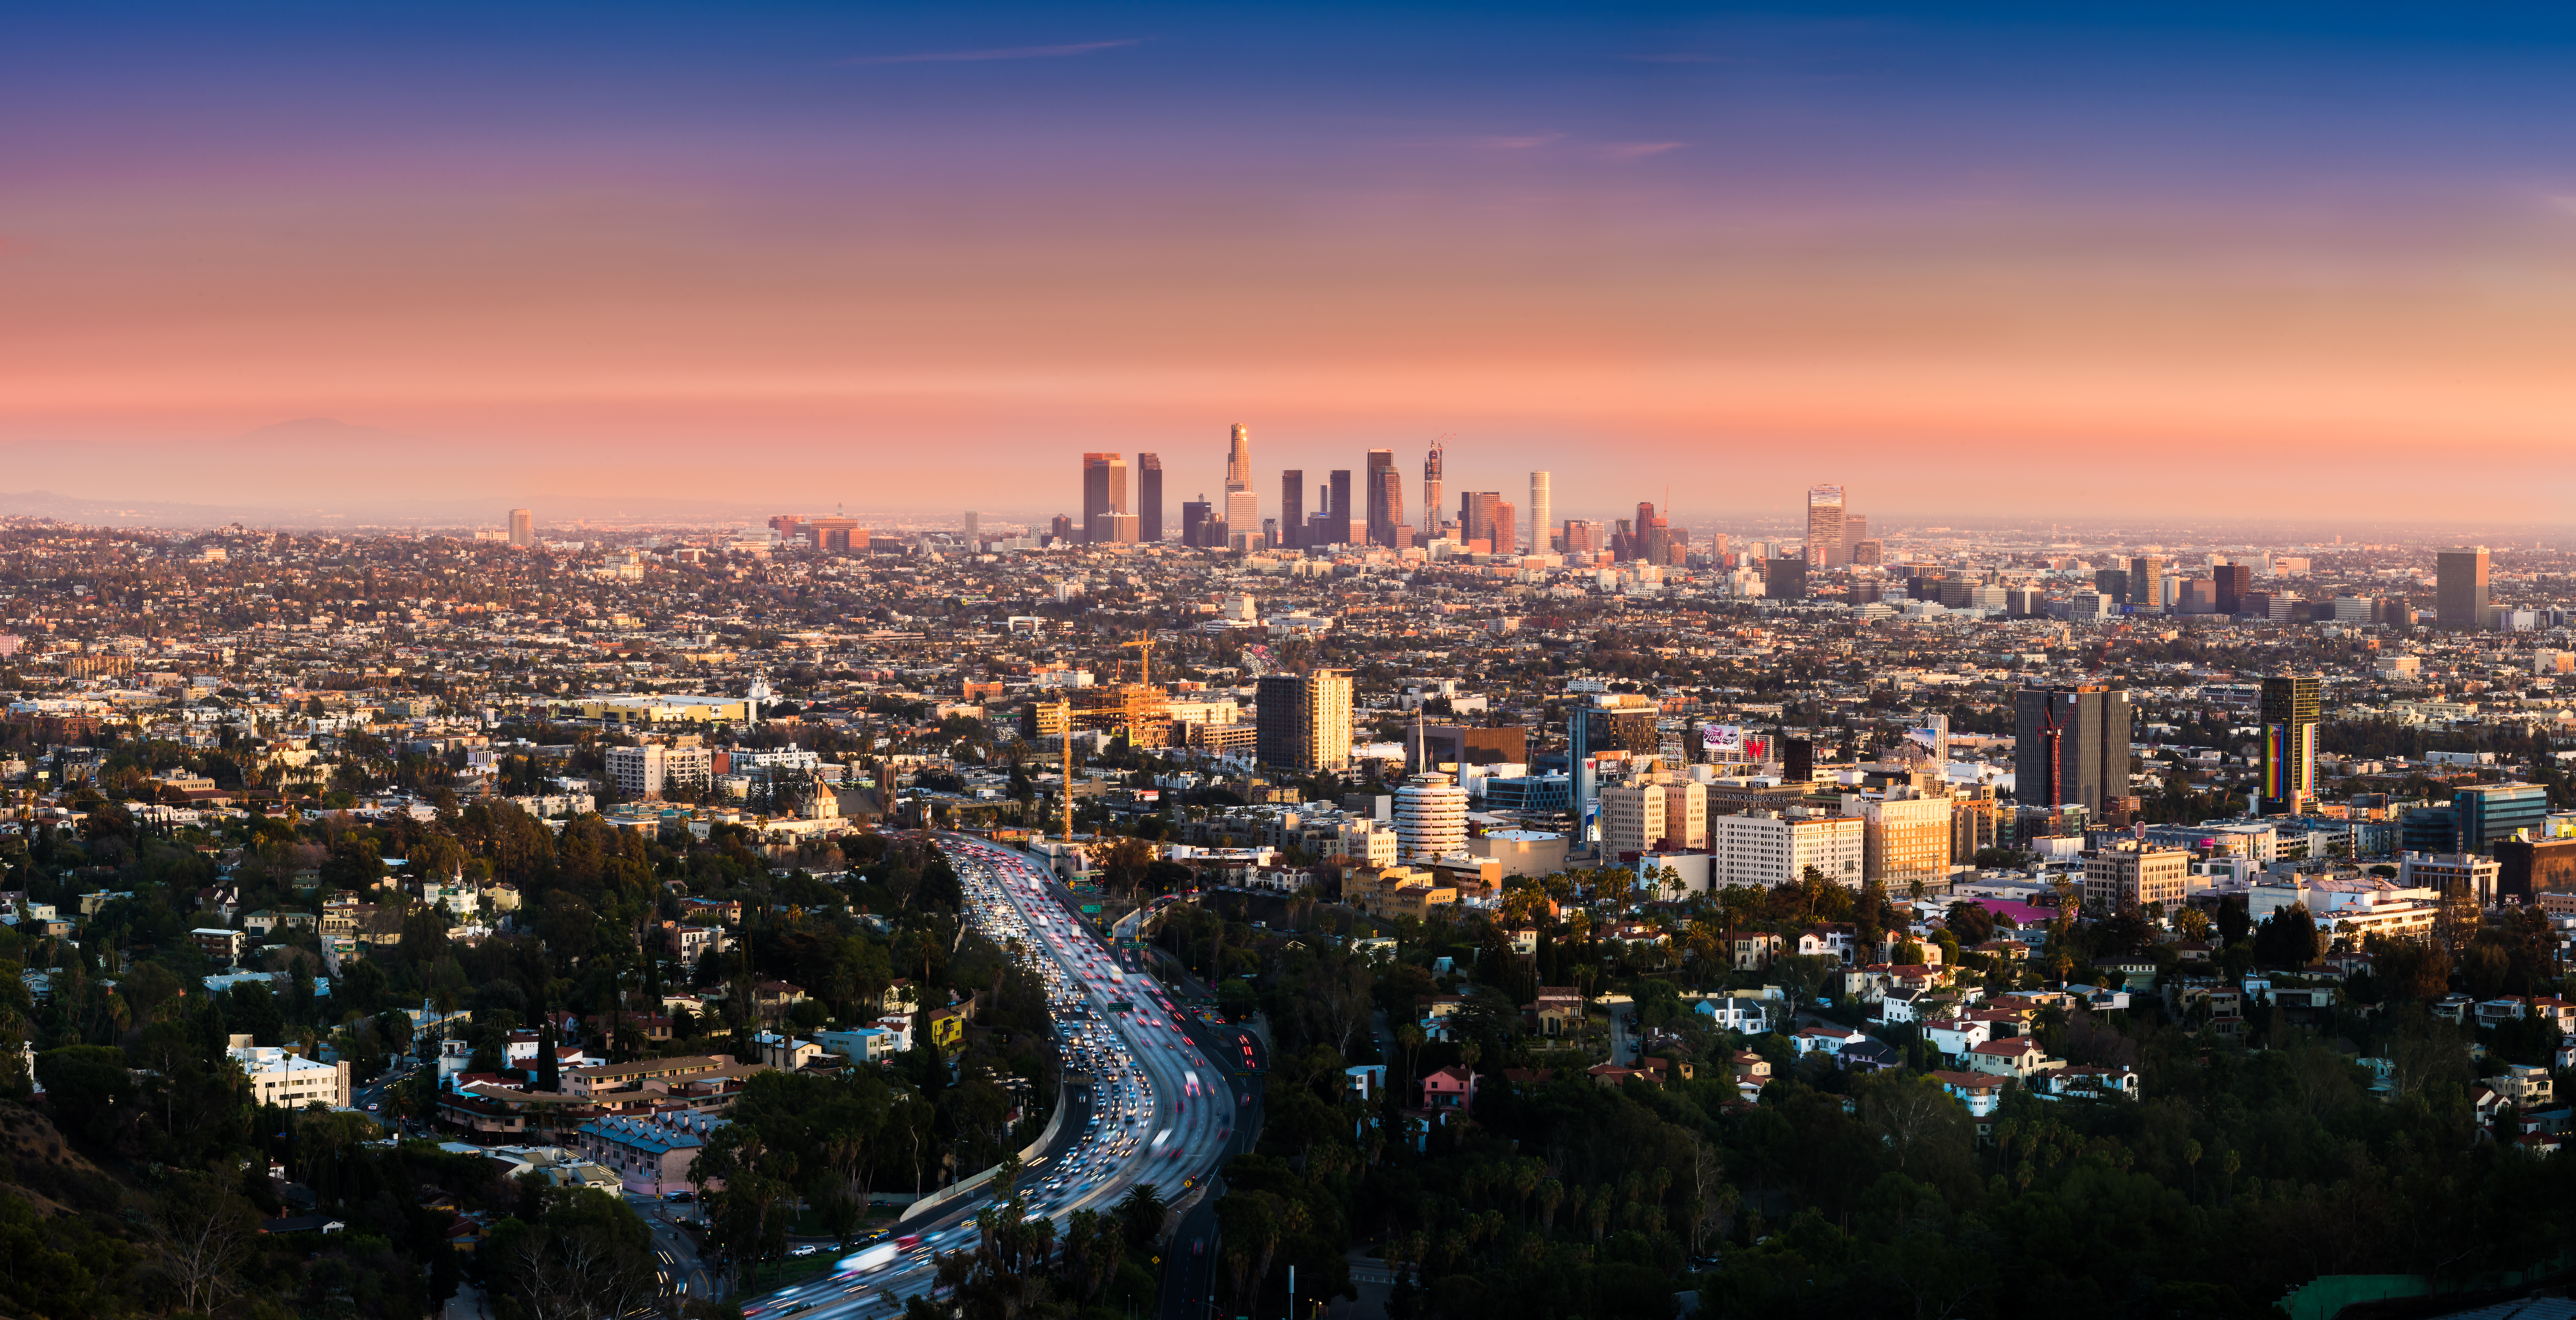 Los Angeles increases paid sick leave - employers must comply by ...